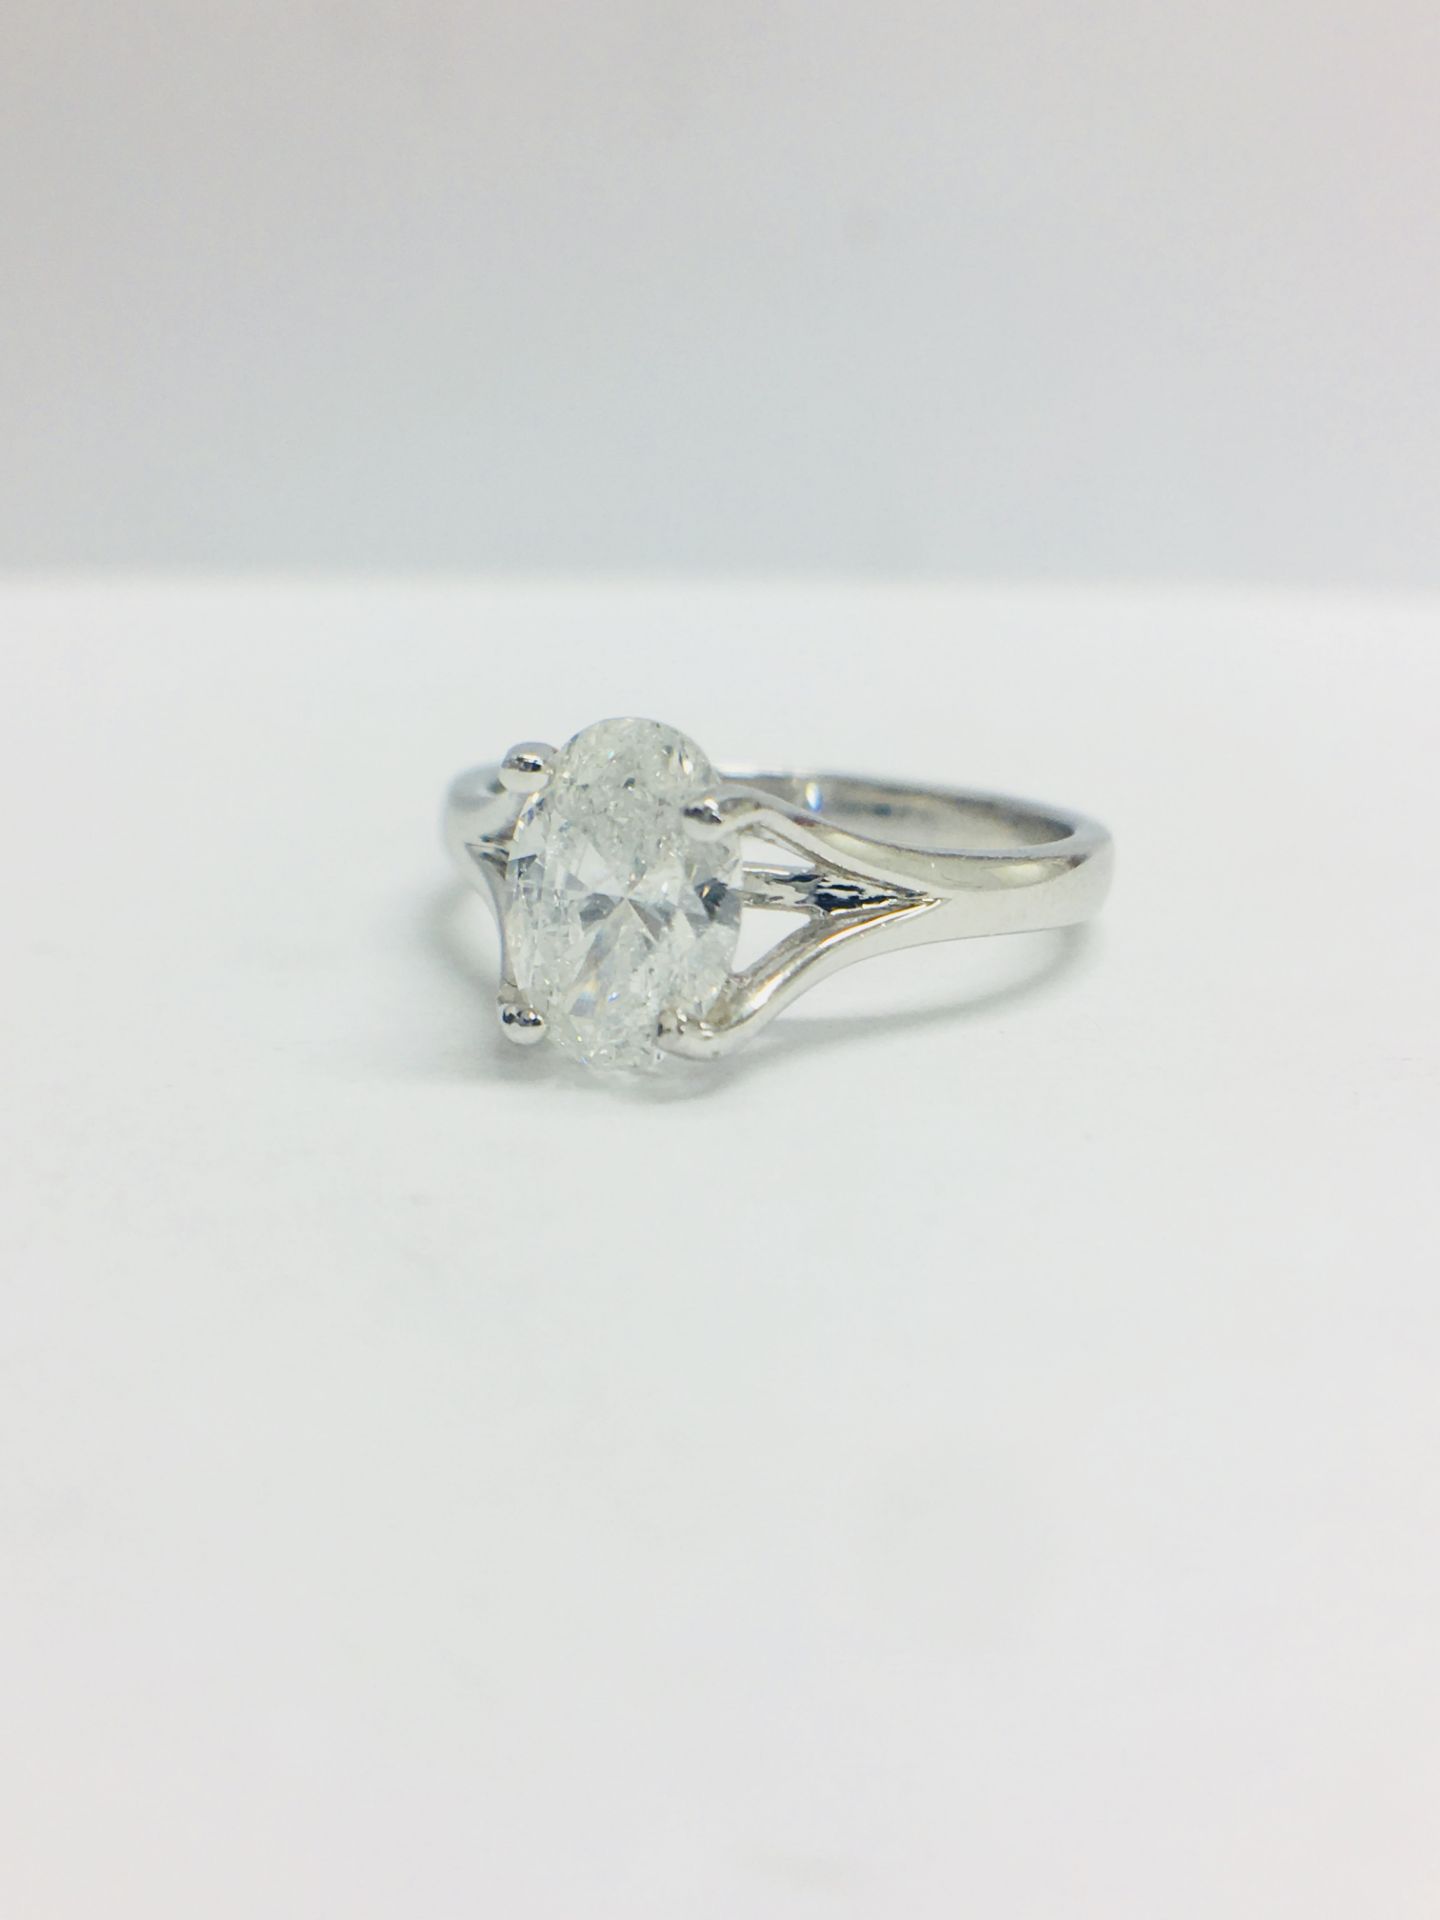 1Ct Oval Cut Diamond Solitaire Ring, - Image 2 of 11